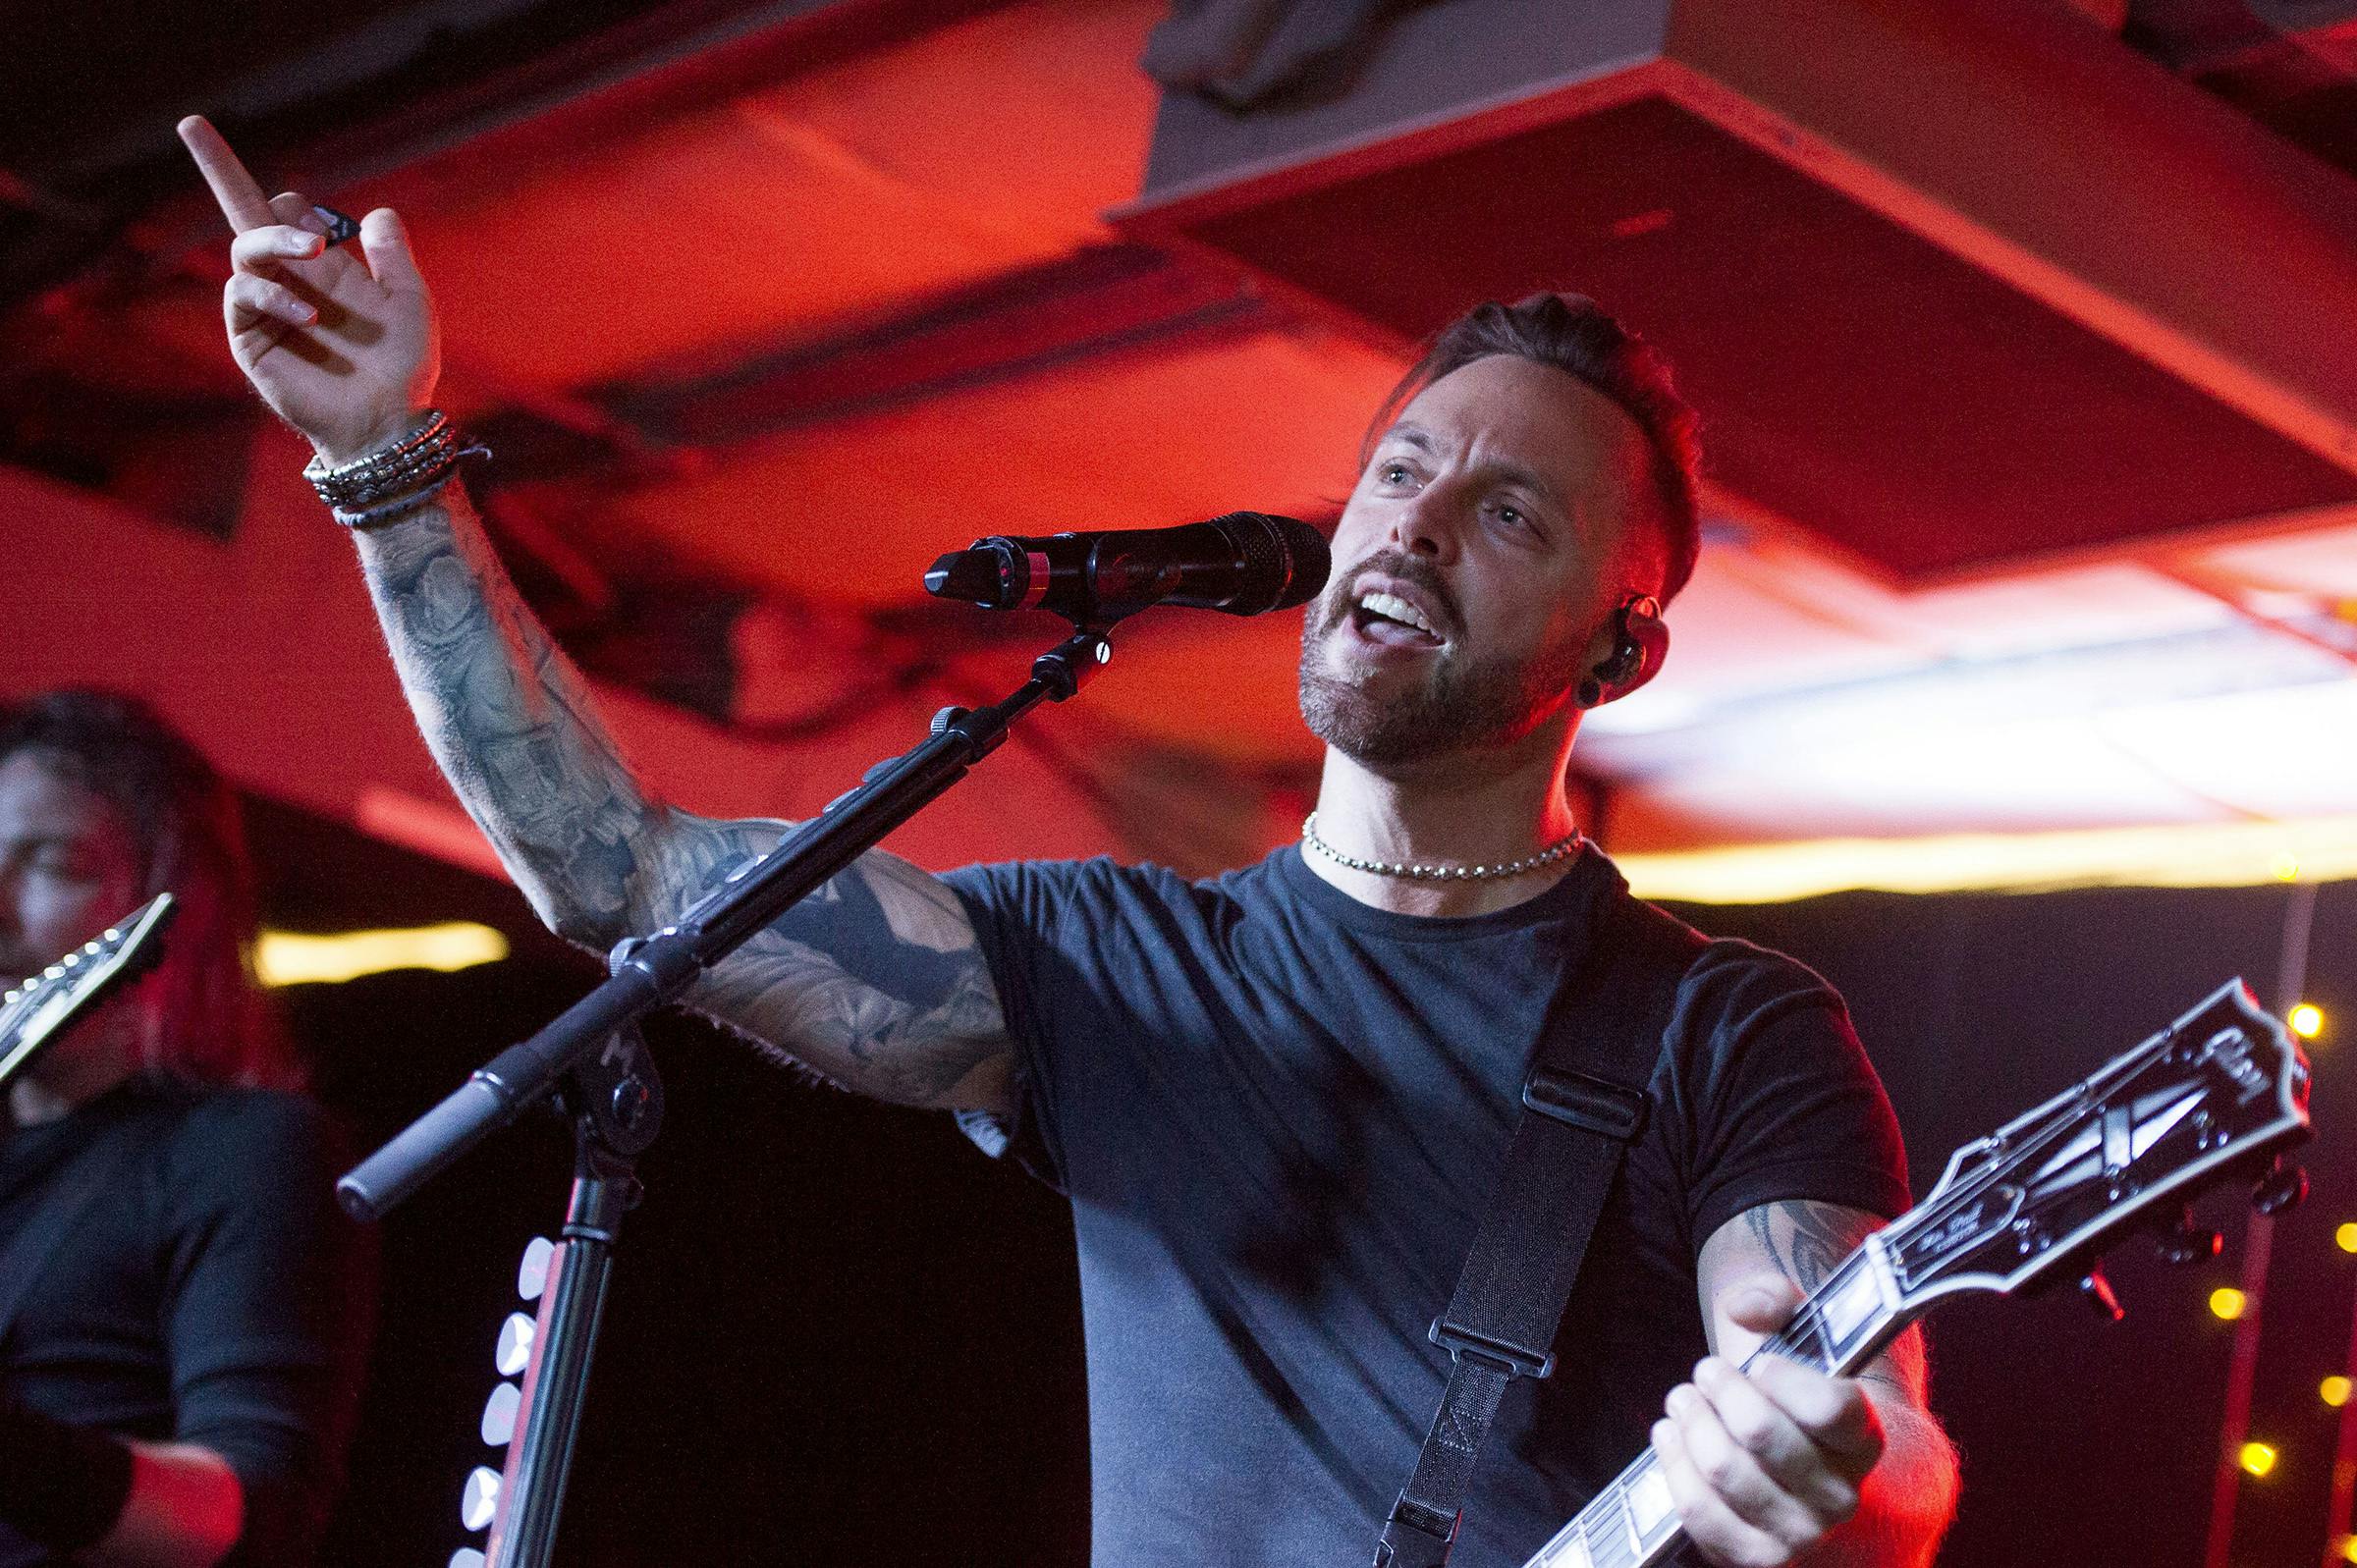 Gallery: Bullet For My Valentine Celebrate Gravity's Release With Epic hmv In-Store